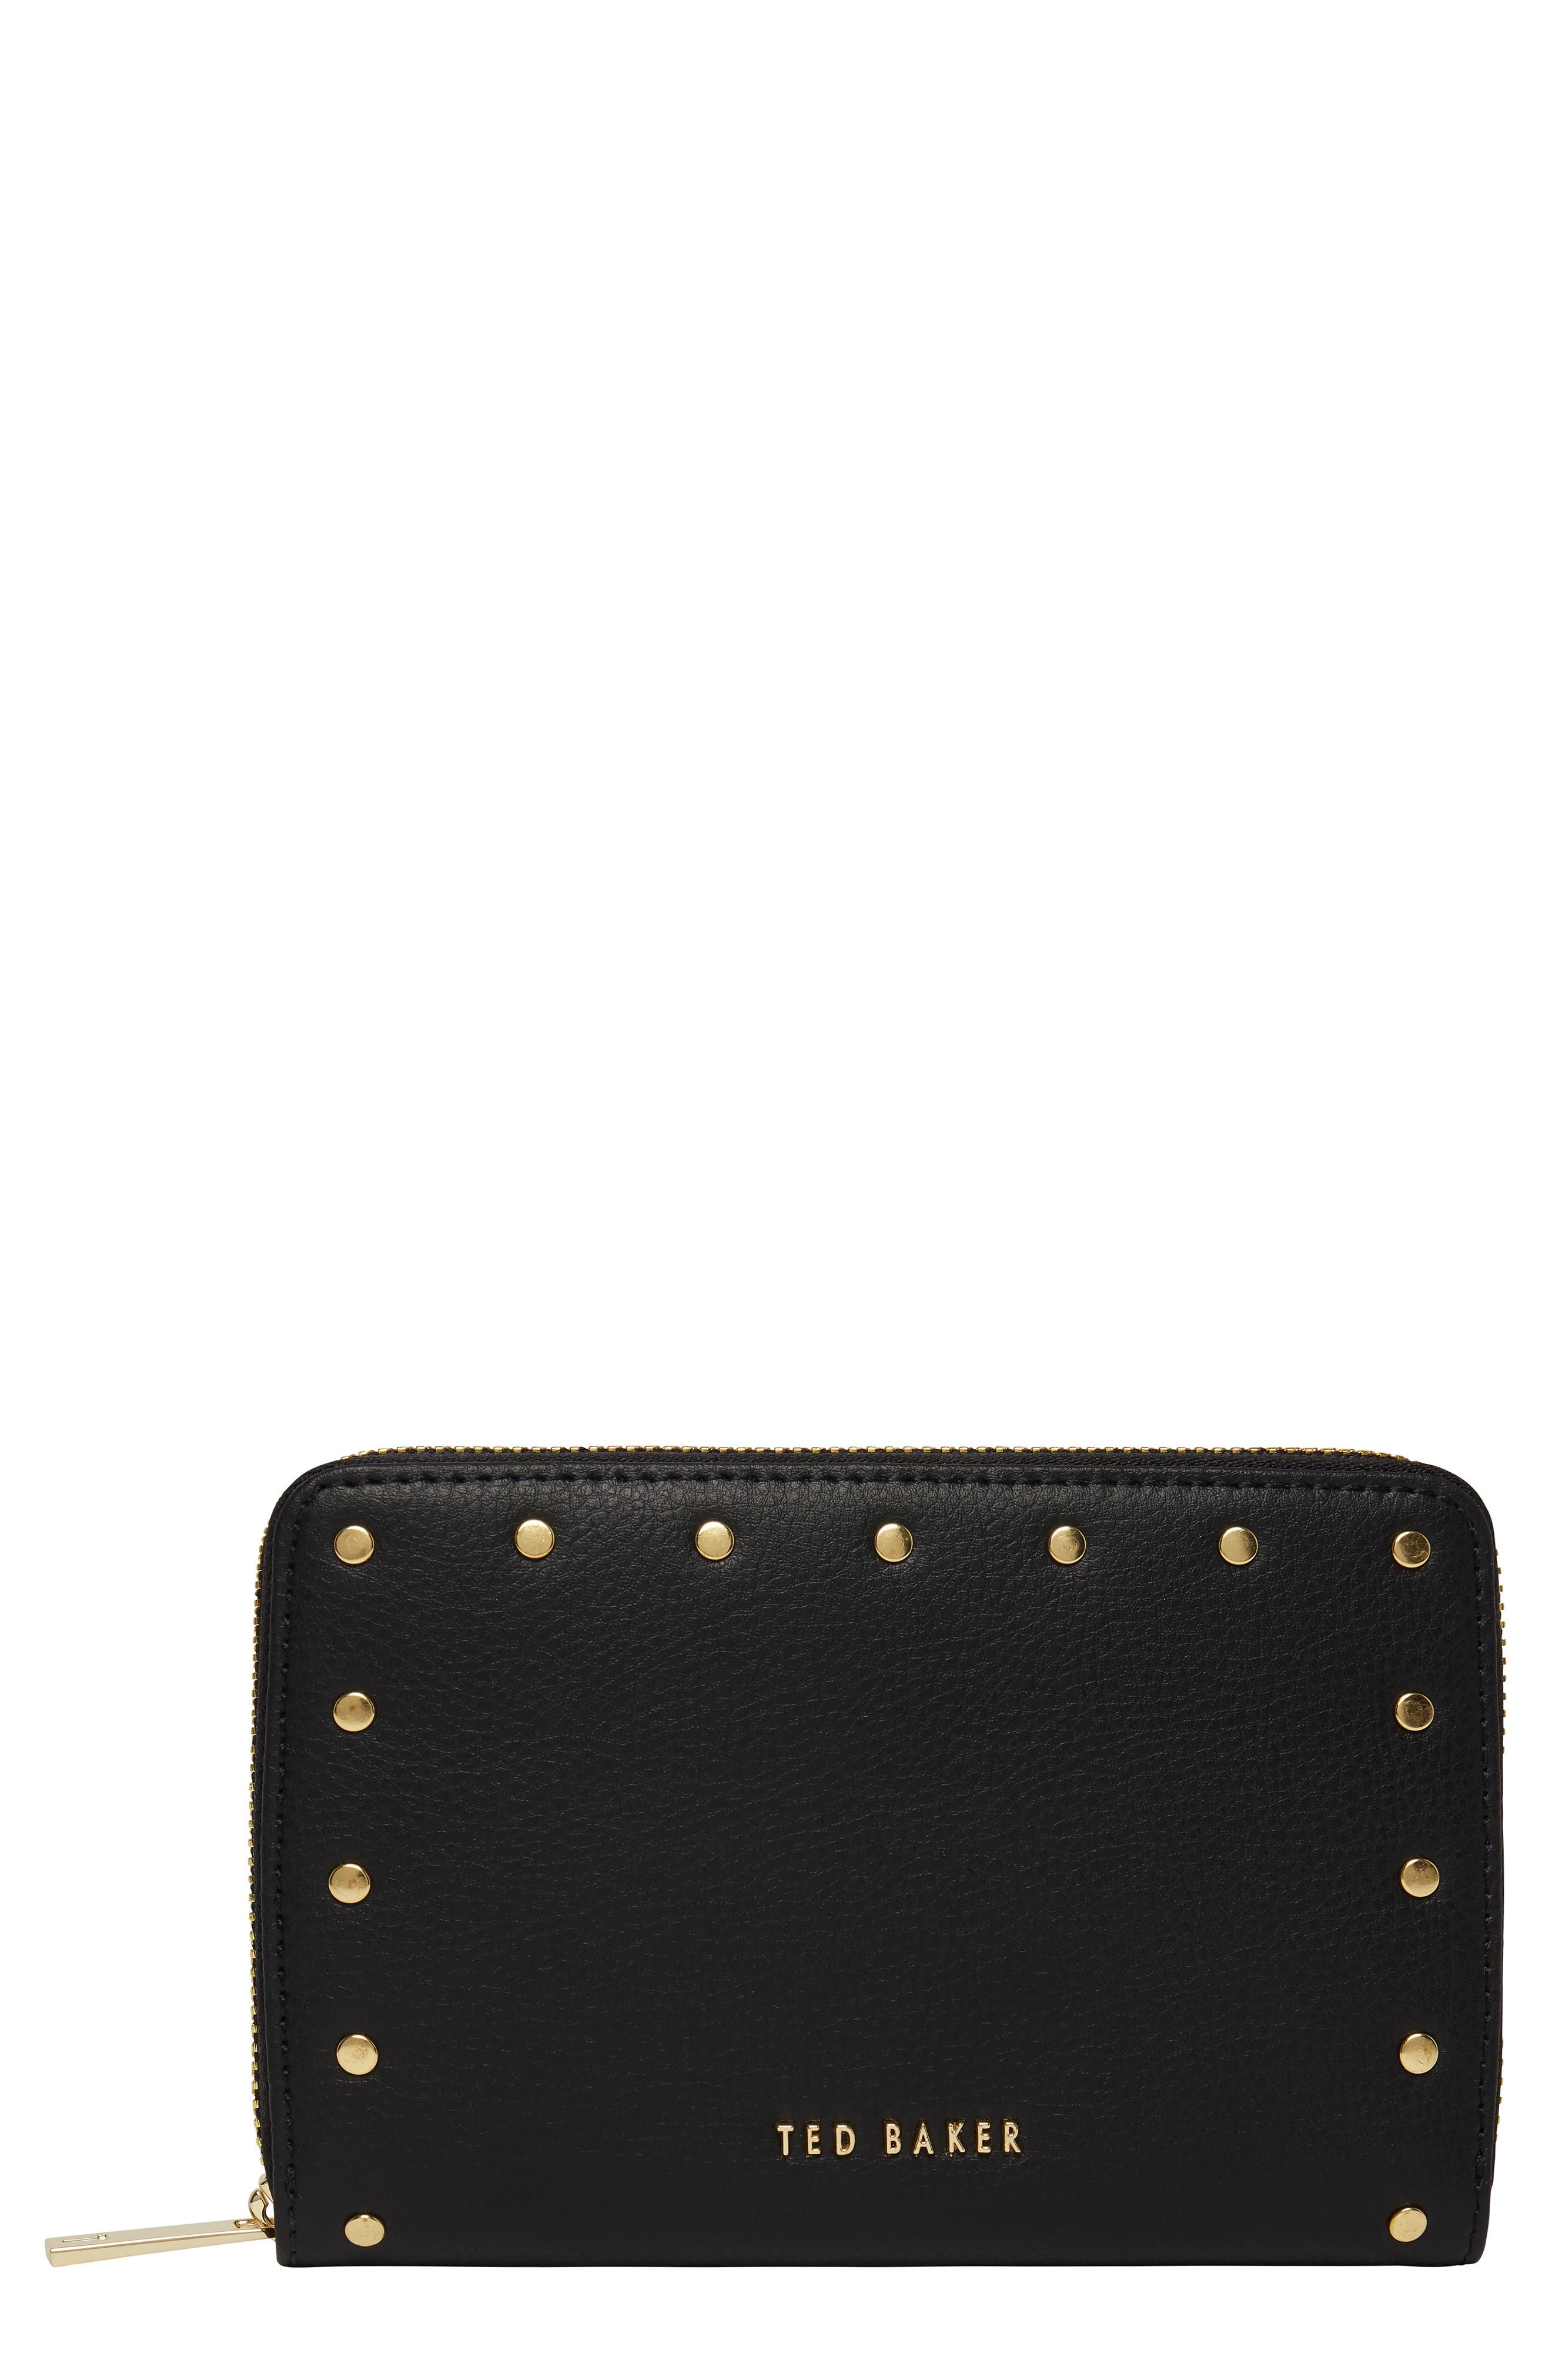 ted baker wallet price